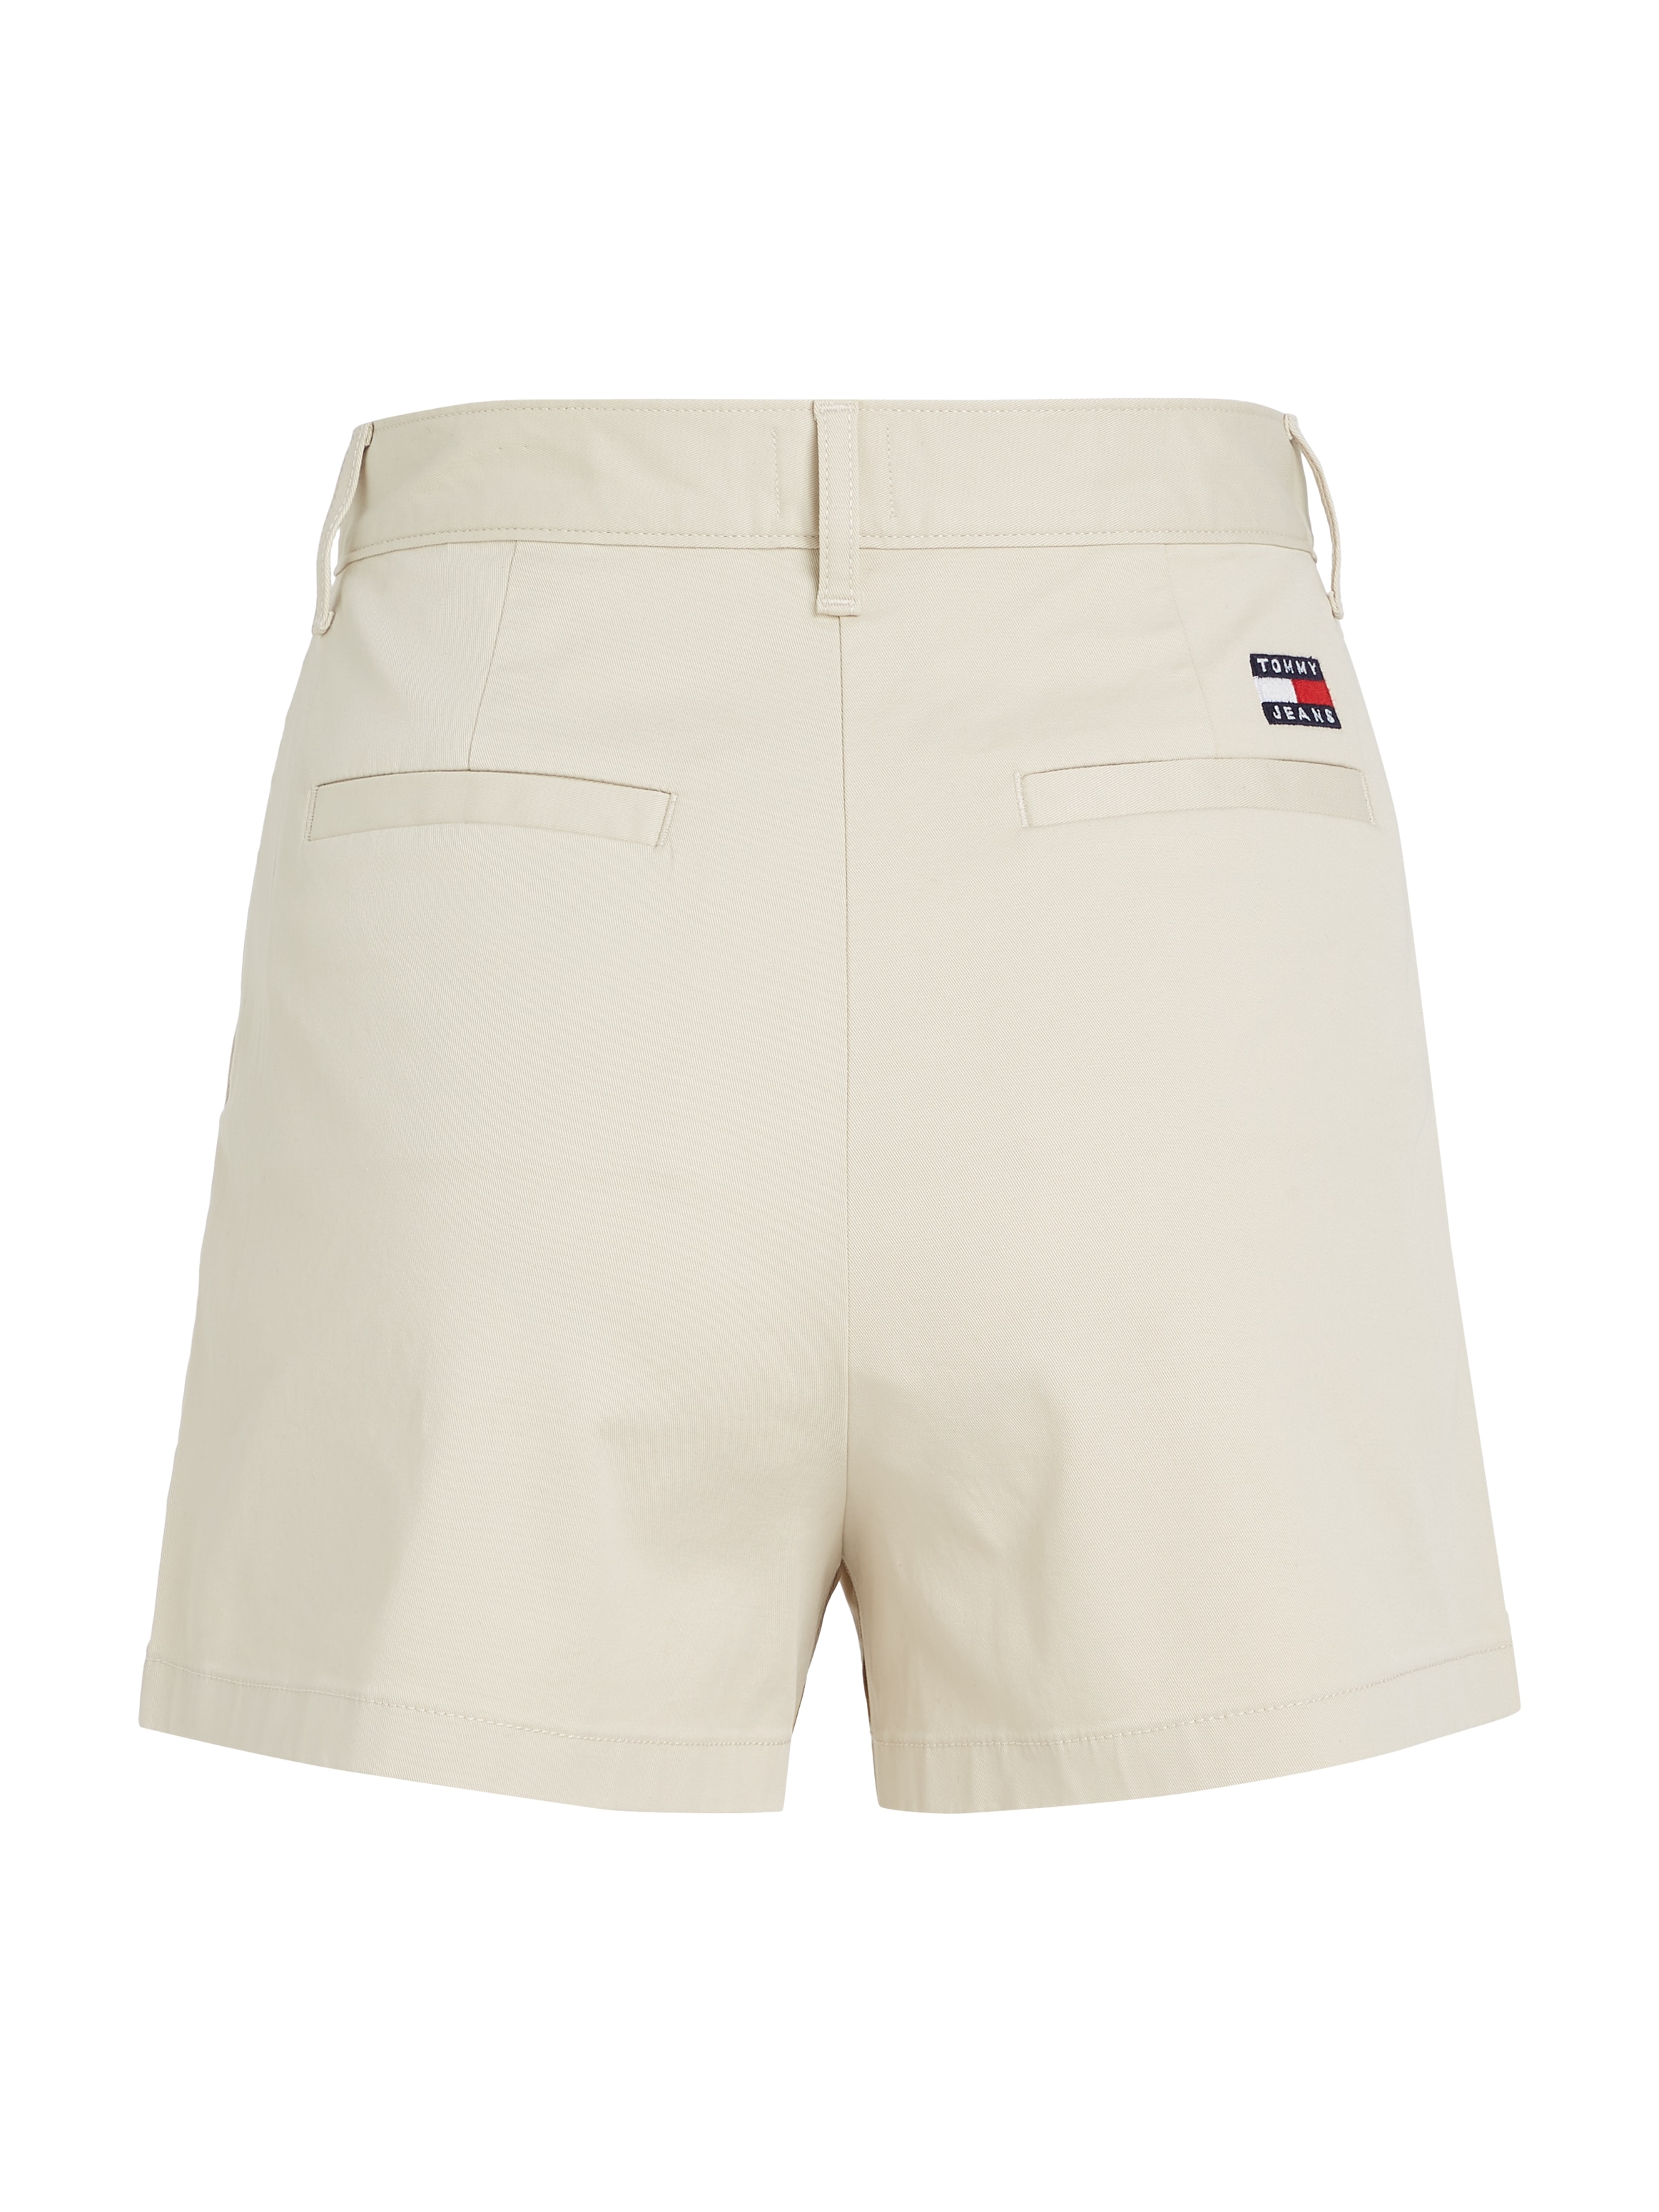 Tommy Jeans Shorts »TJW CLAIRE HR PLEATED SHORTS«, mit Tommy Jeans Markenlabel